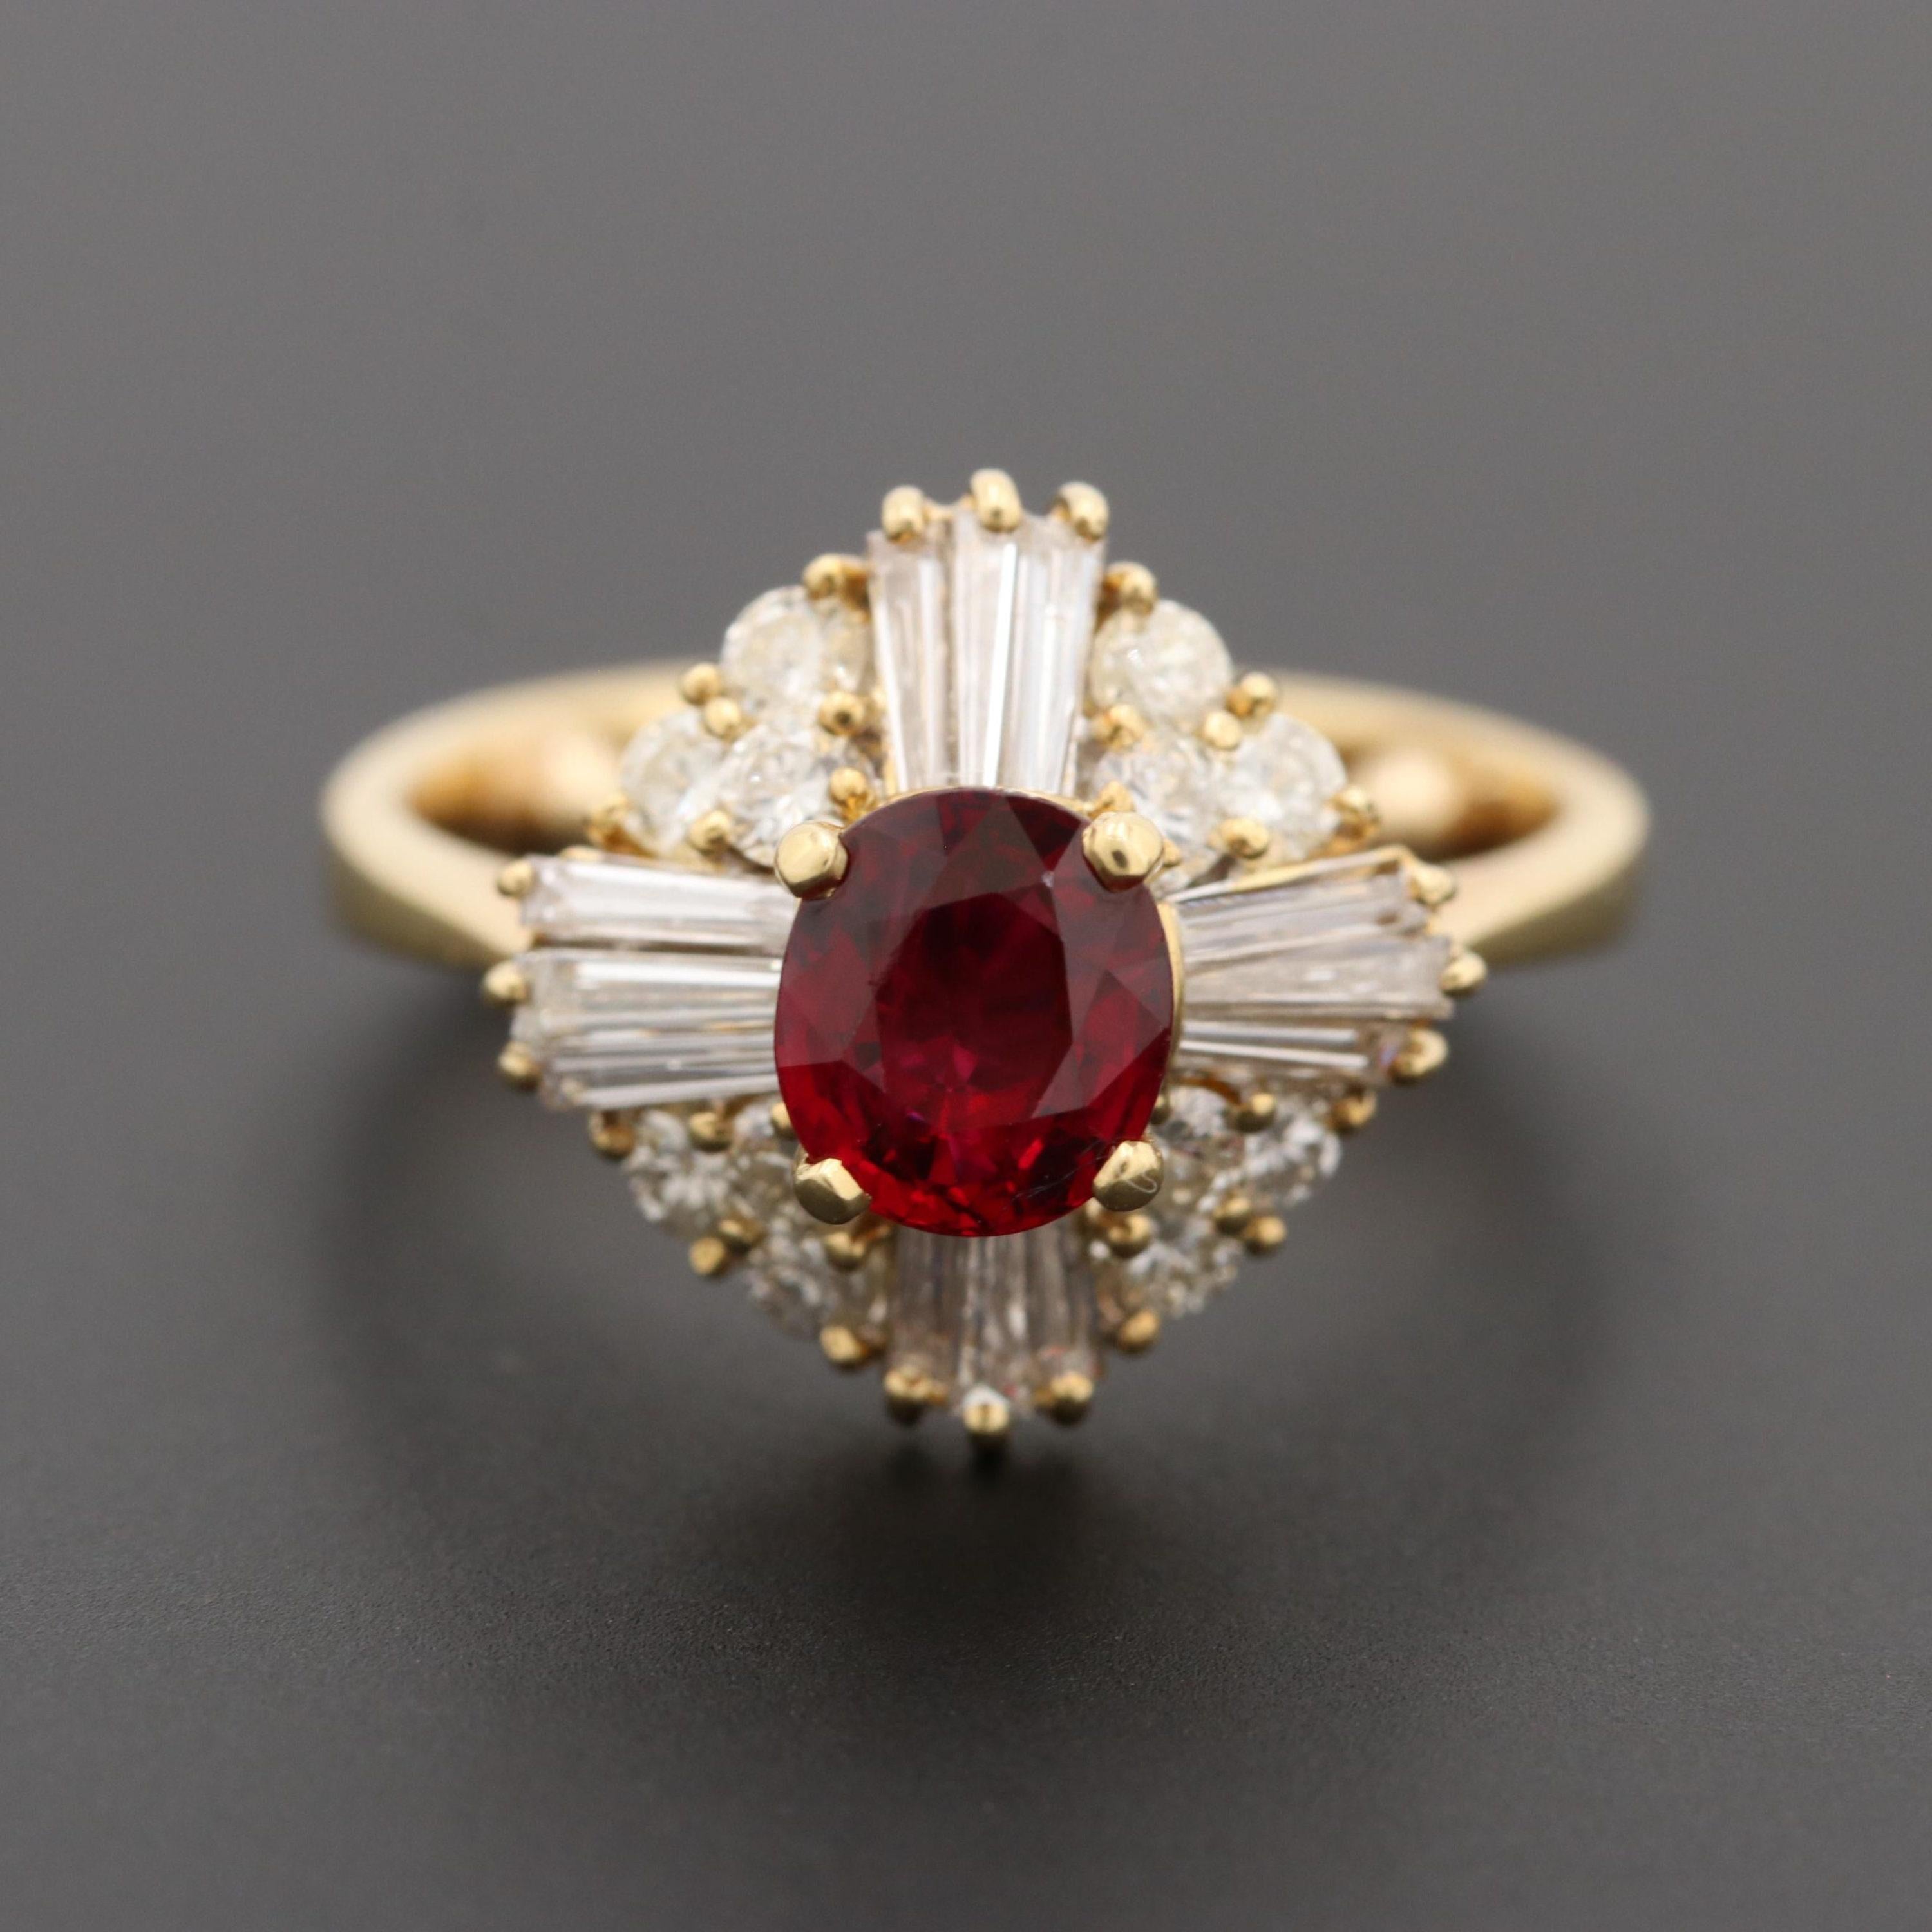 For Sale:  Floral Oval Cut Ruby Diamond Engagement Ring Victorian Ruby Diamond Wedding Ring 5